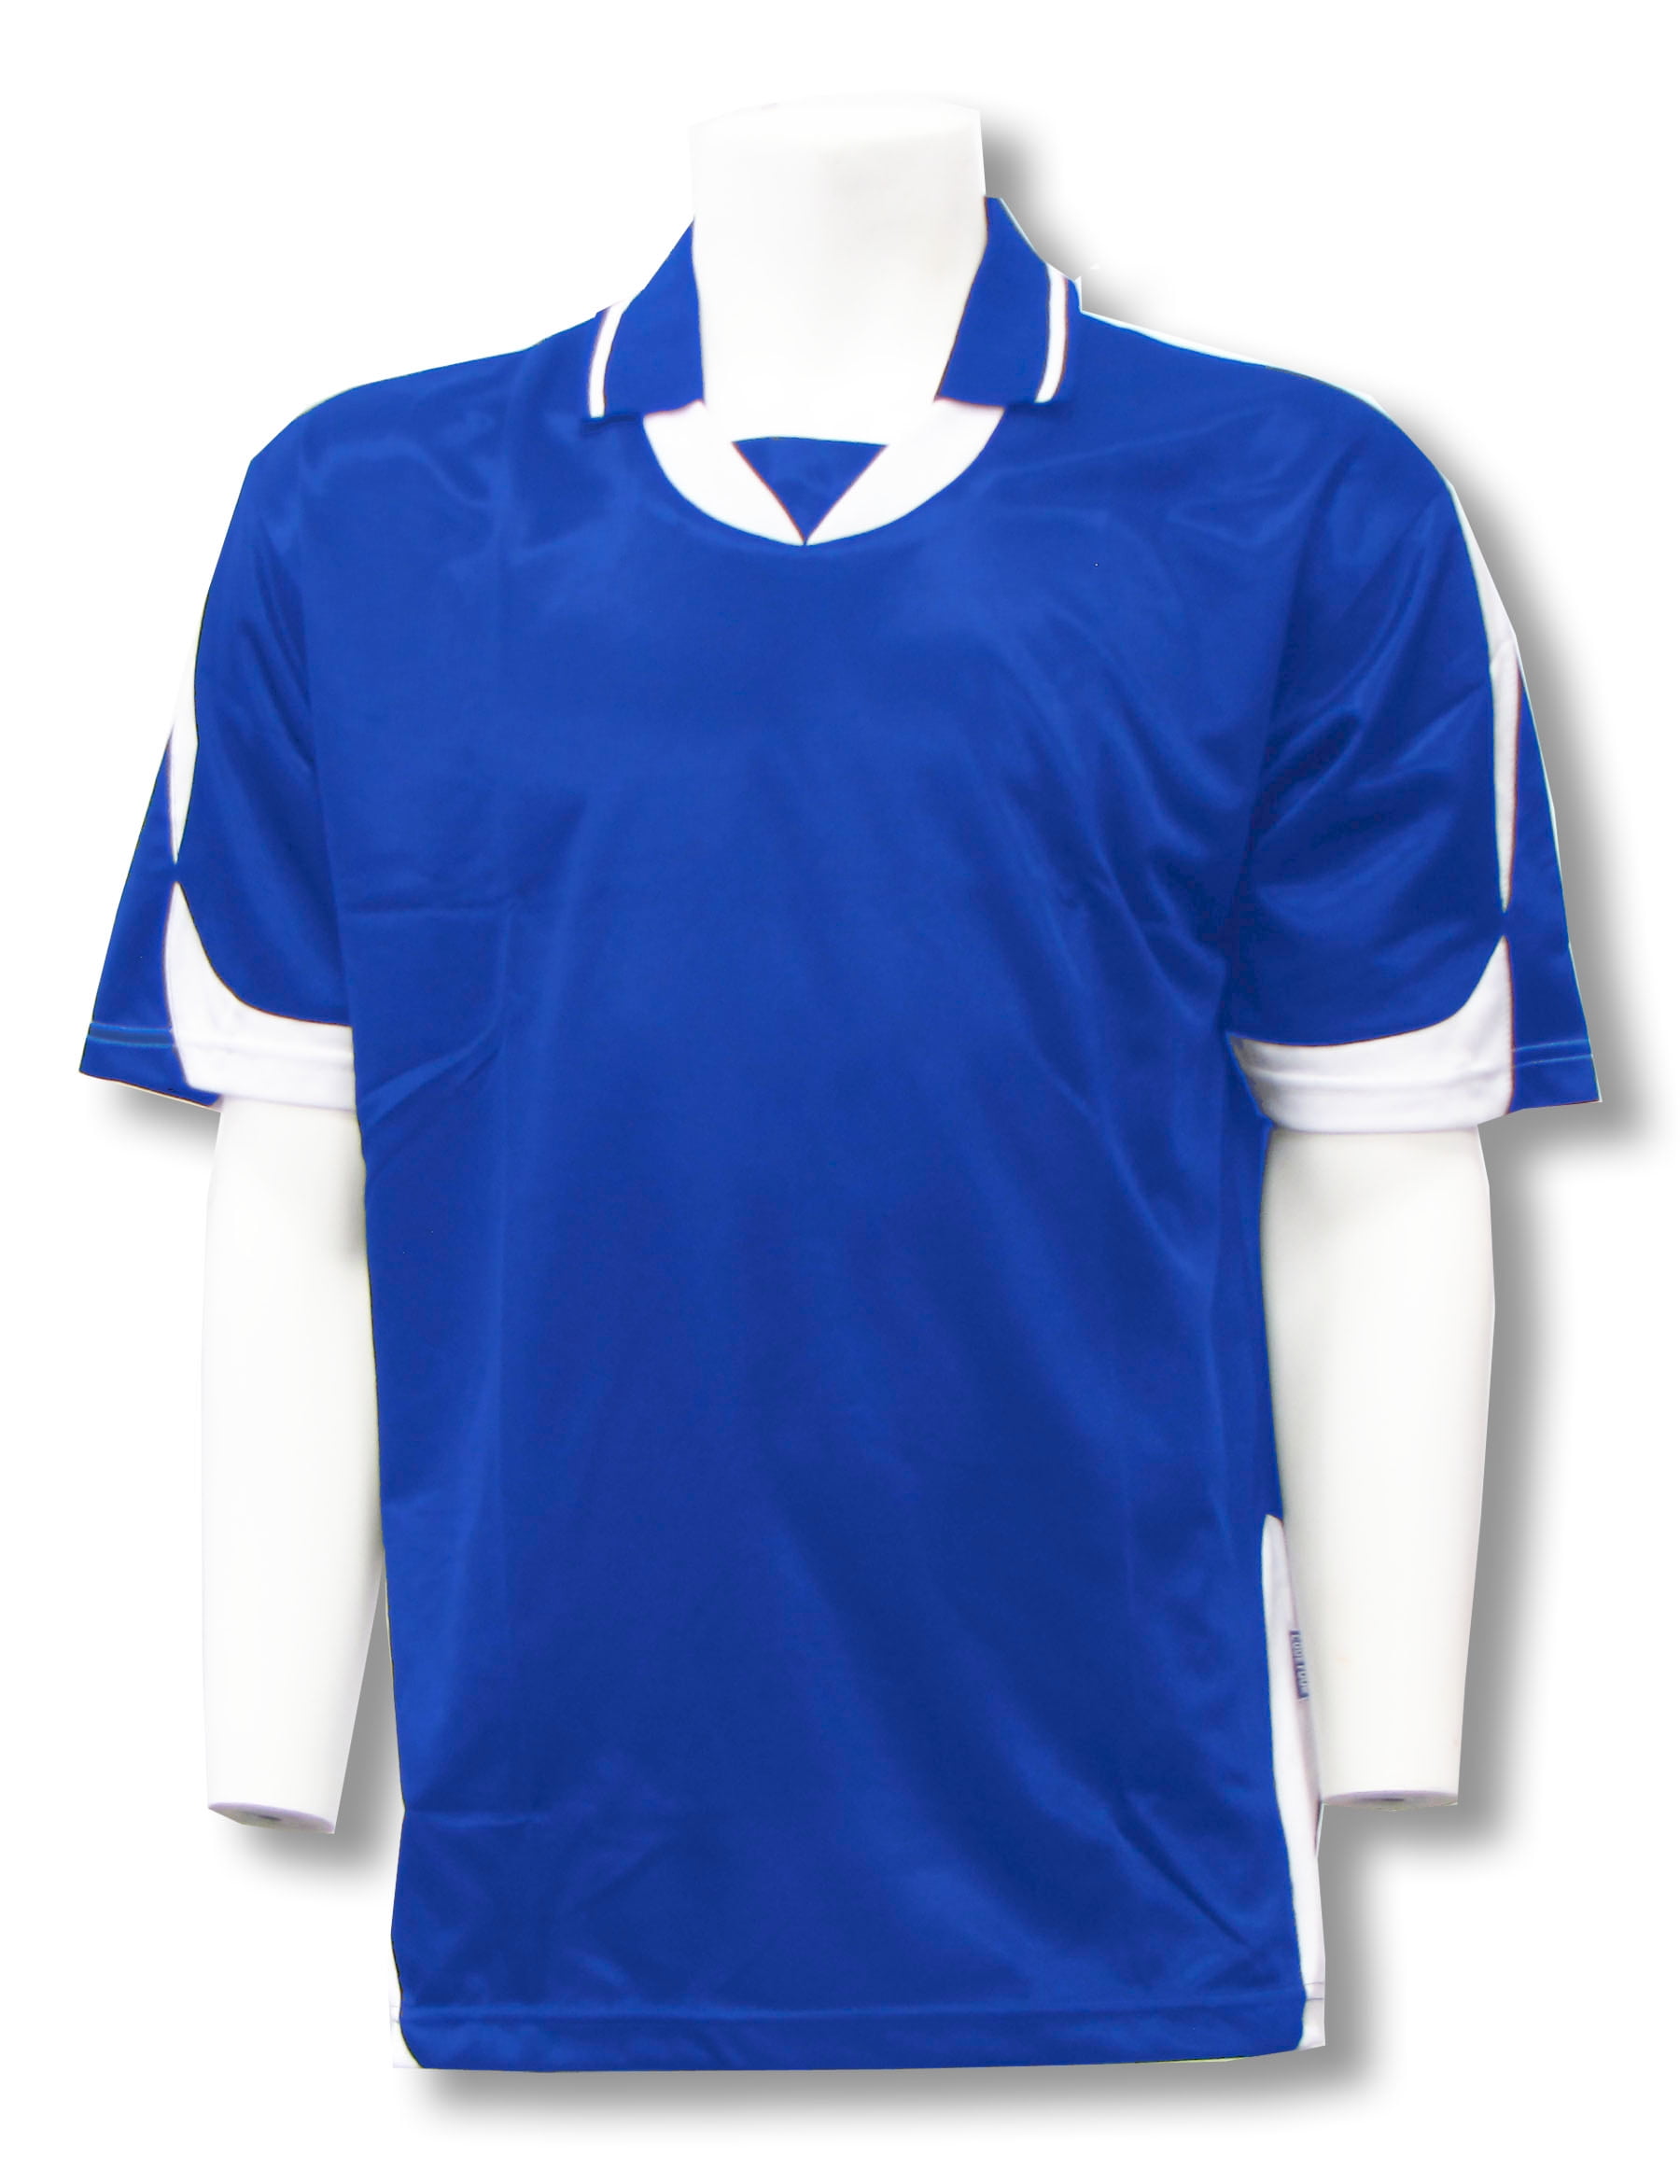 soccer jersey with collar